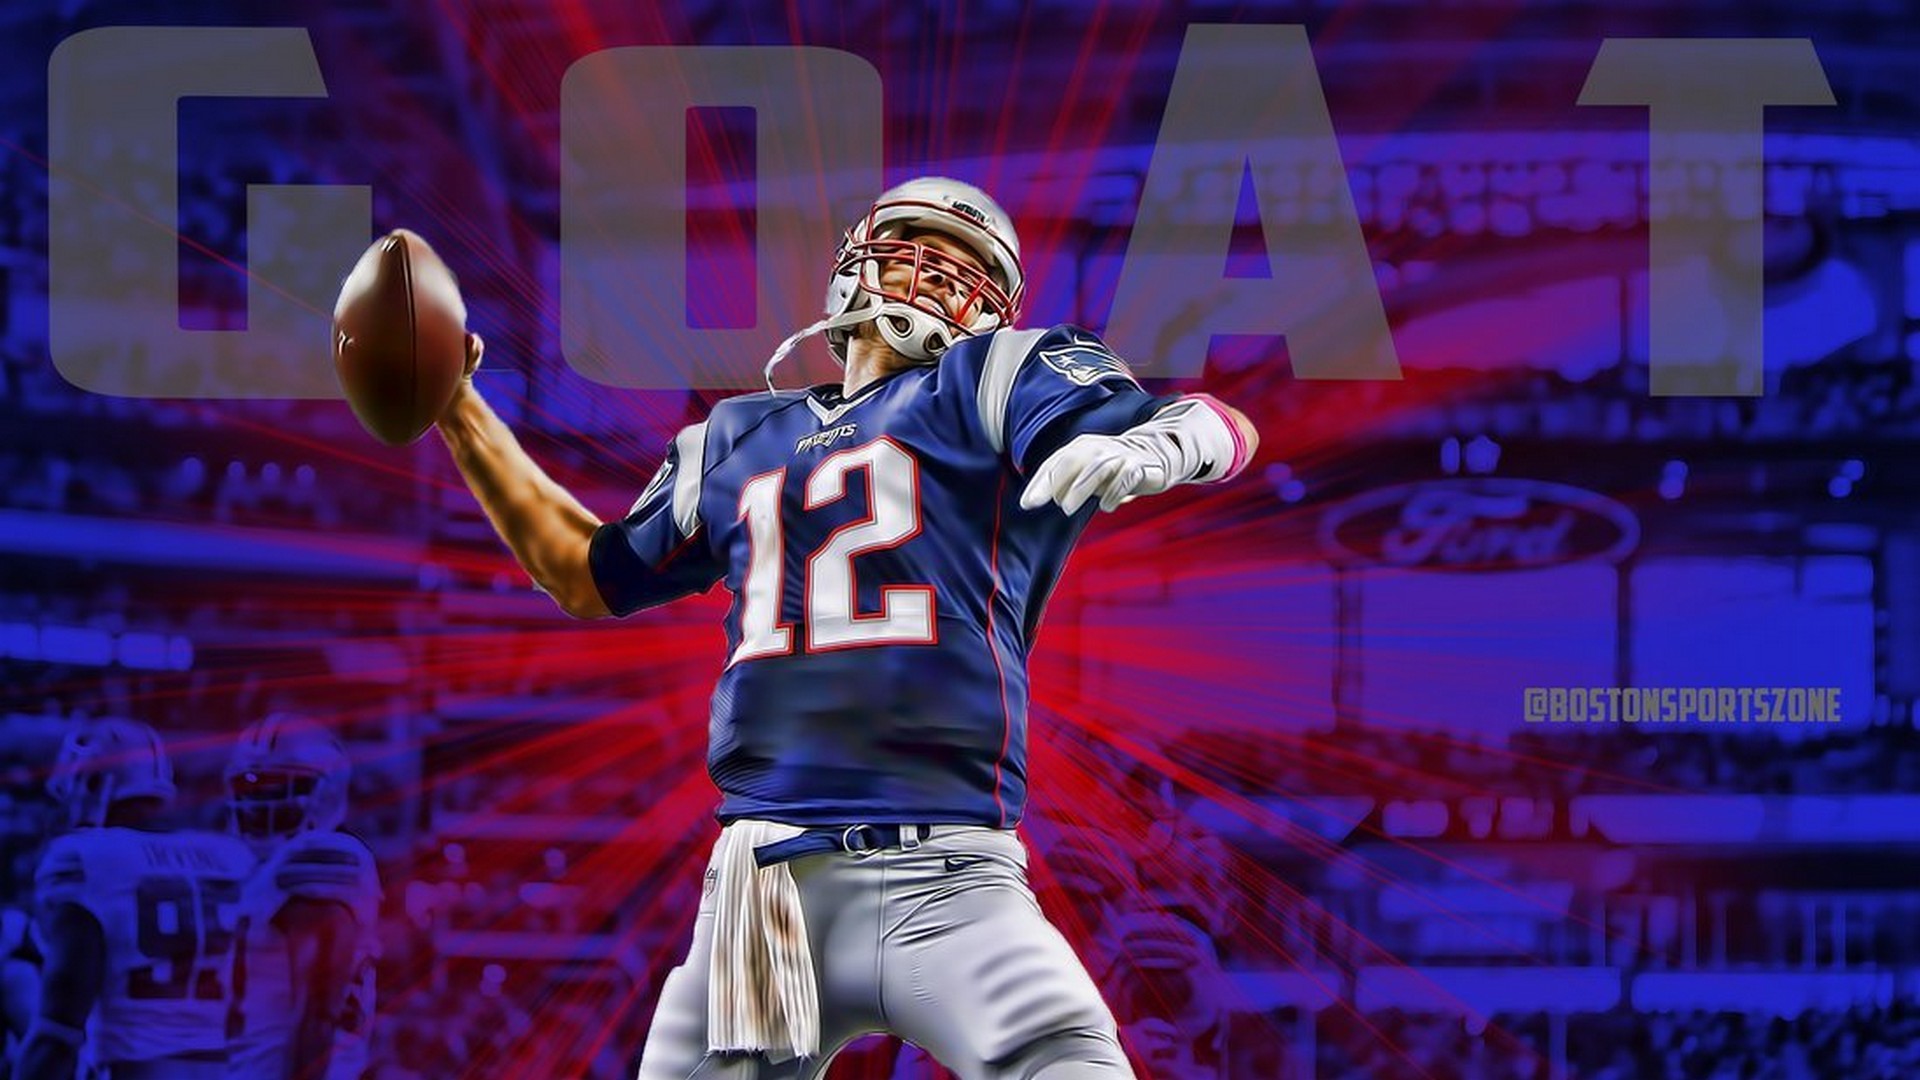 Wallpaper Tom Brady Patriots Desktop with image resolution 1920x1080 pixel. You can use this wallpaper as background for your desktop Computer Screensavers, Android or iPhone smartphones